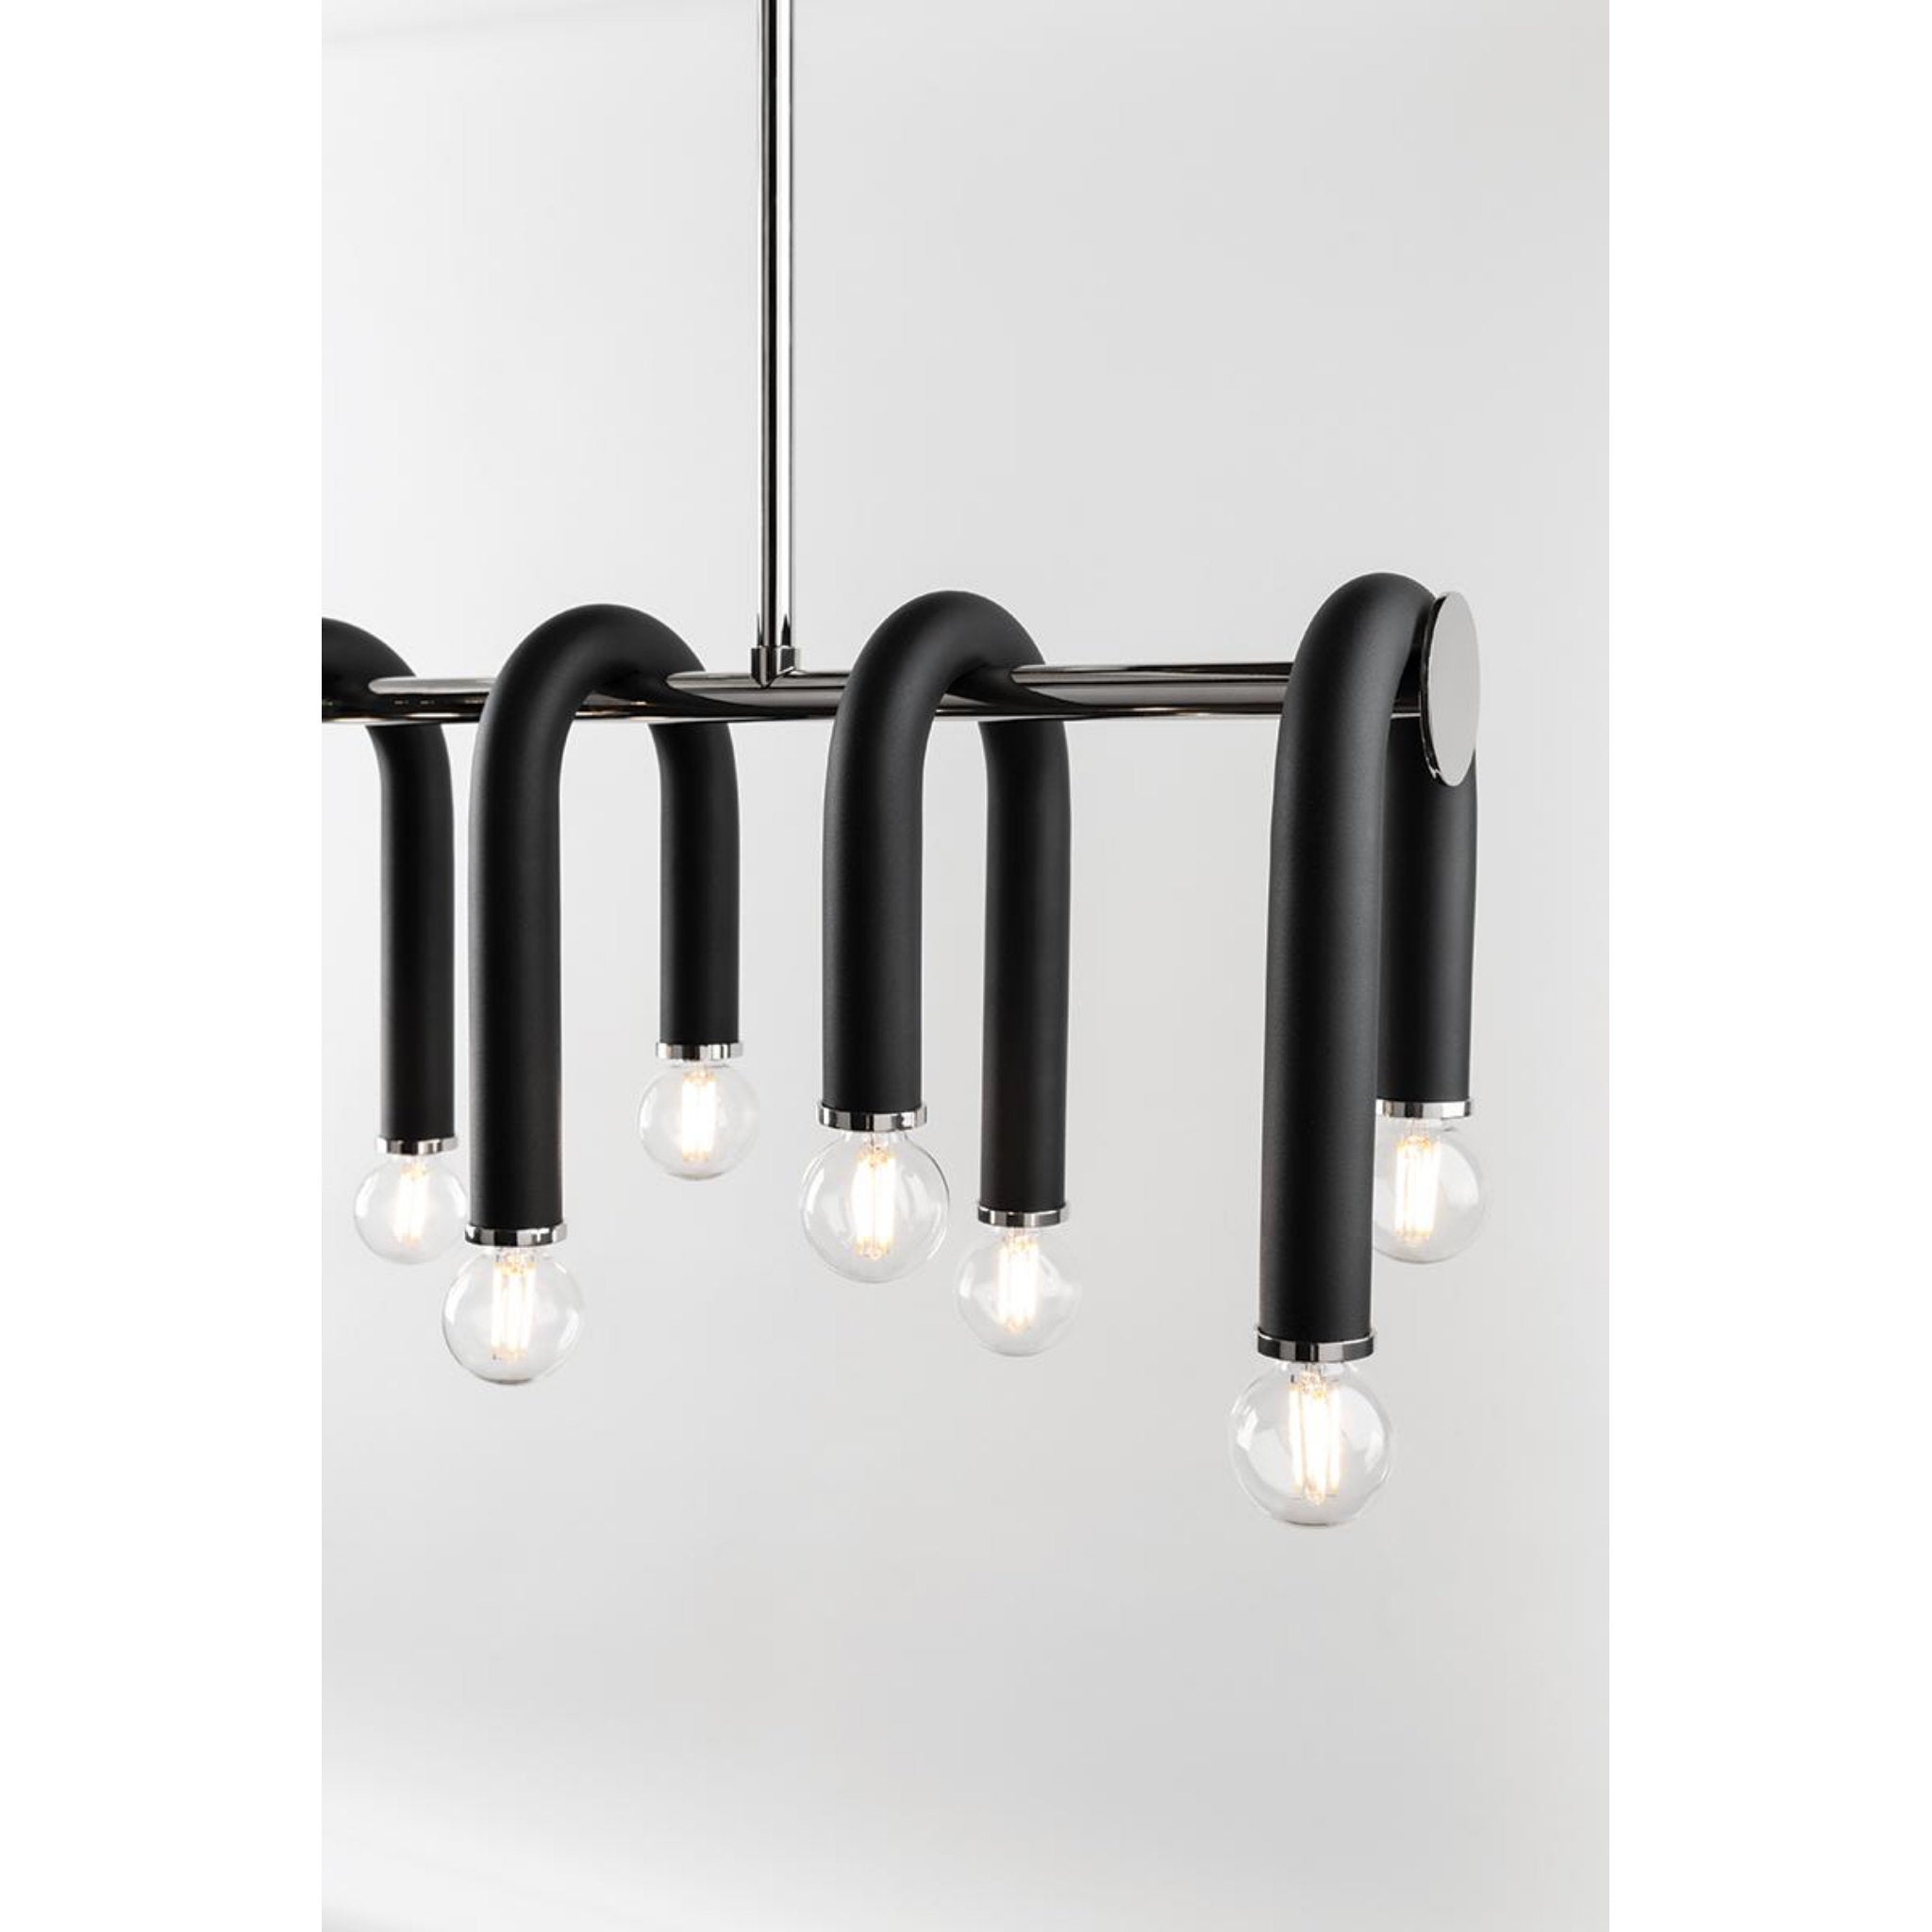 Whit 2-Light Wall Sconce in Polished Nickel/Black